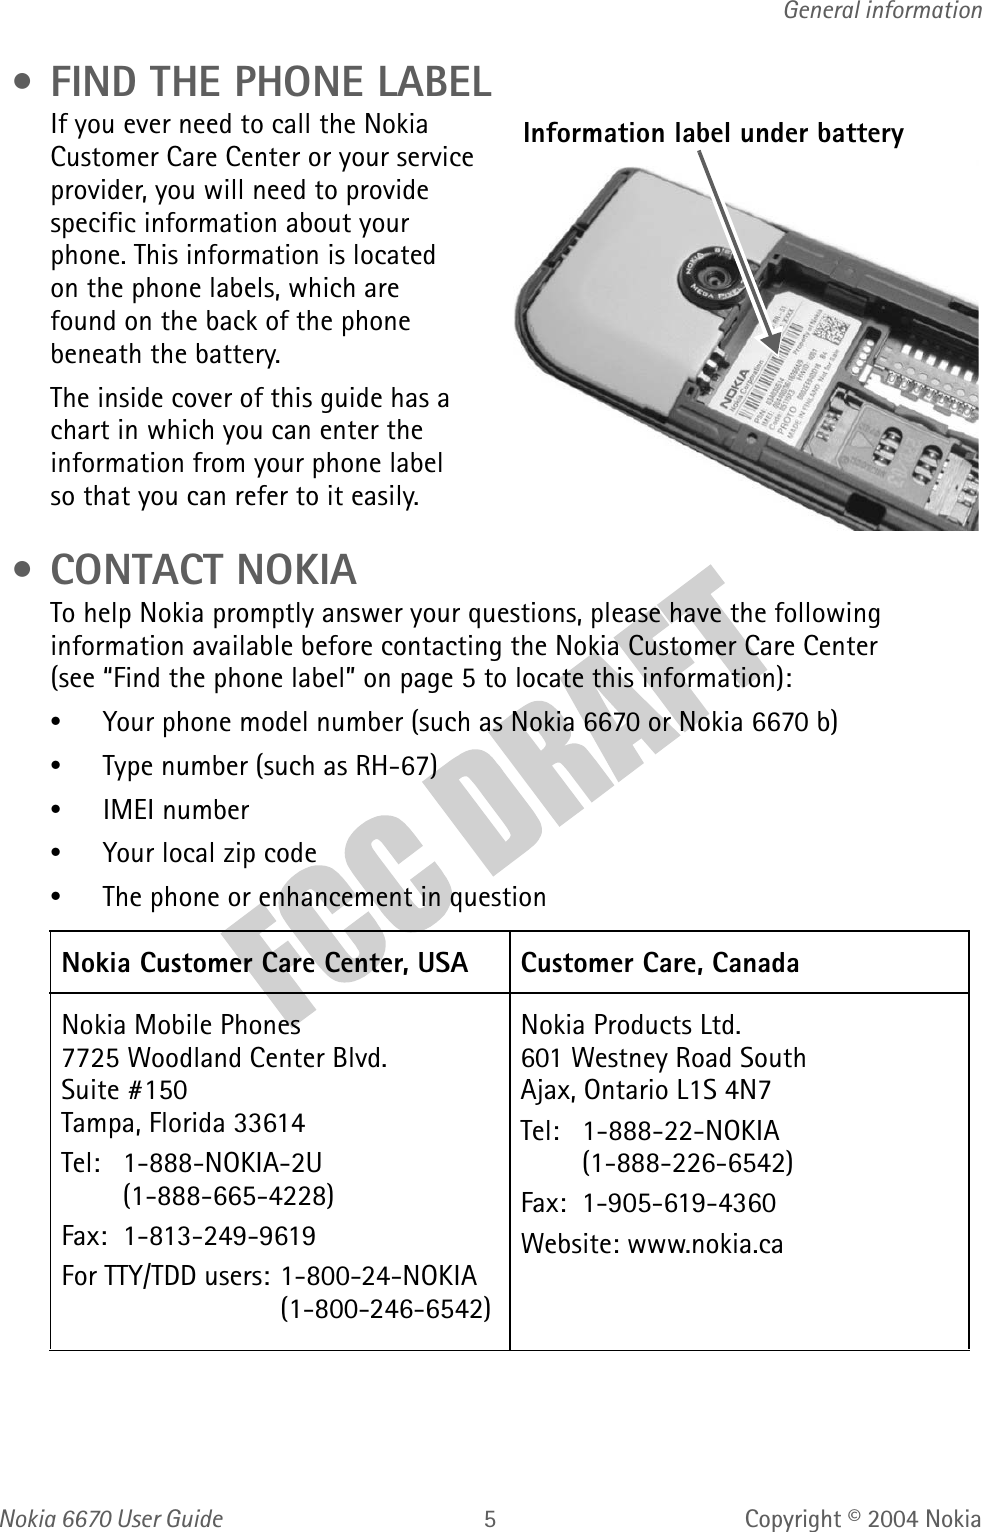 Nokia  User GuideCopyright © 2004 NokiaGeneral information • FIND THE PHONE LABELIf you ever need to call the Nokia Customer Care Center or your service provider, you will need to provide specific information about your phone. This information is located on the phone labels, which are found on the back of the phone beneath the battery.The inside cover of this guide has a chart in which you can enter the information from your phone label so that you can refer to it easily. •CONTACT NOKIATo help Nokia promptly answer your questions, please have the following information available before contacting the Nokia Customer Care Center (see “Find the phone label” on page 5 to locate this information):•Your phone model number (such as Nokia 6670 or Nokia 6670 b)• Type number (such as RH-67)•IMEI number•Your local zip code•The phone or enhancement in question Nokia Customer Care Center, USA Customer Care, CanadaNokia Mobile Phones7725 Woodland Center Blvd. Suite #150Tampa, Florida 33614Tel: 1-888-NOKIA-2U(1-888-665-4228)Fax: 1-813-249-9619For TTY/TDD users: 1-800-24-NOKIA(1-800-246-6542)Nokia Products Ltd.601 Westney Road SouthAjax, Ontario L1S 4N7Tel: 1-888-22-NOKIA (1-888-226-6542)Fax:  1-905-619-4360Website: www.nokia.caInformation label under battery